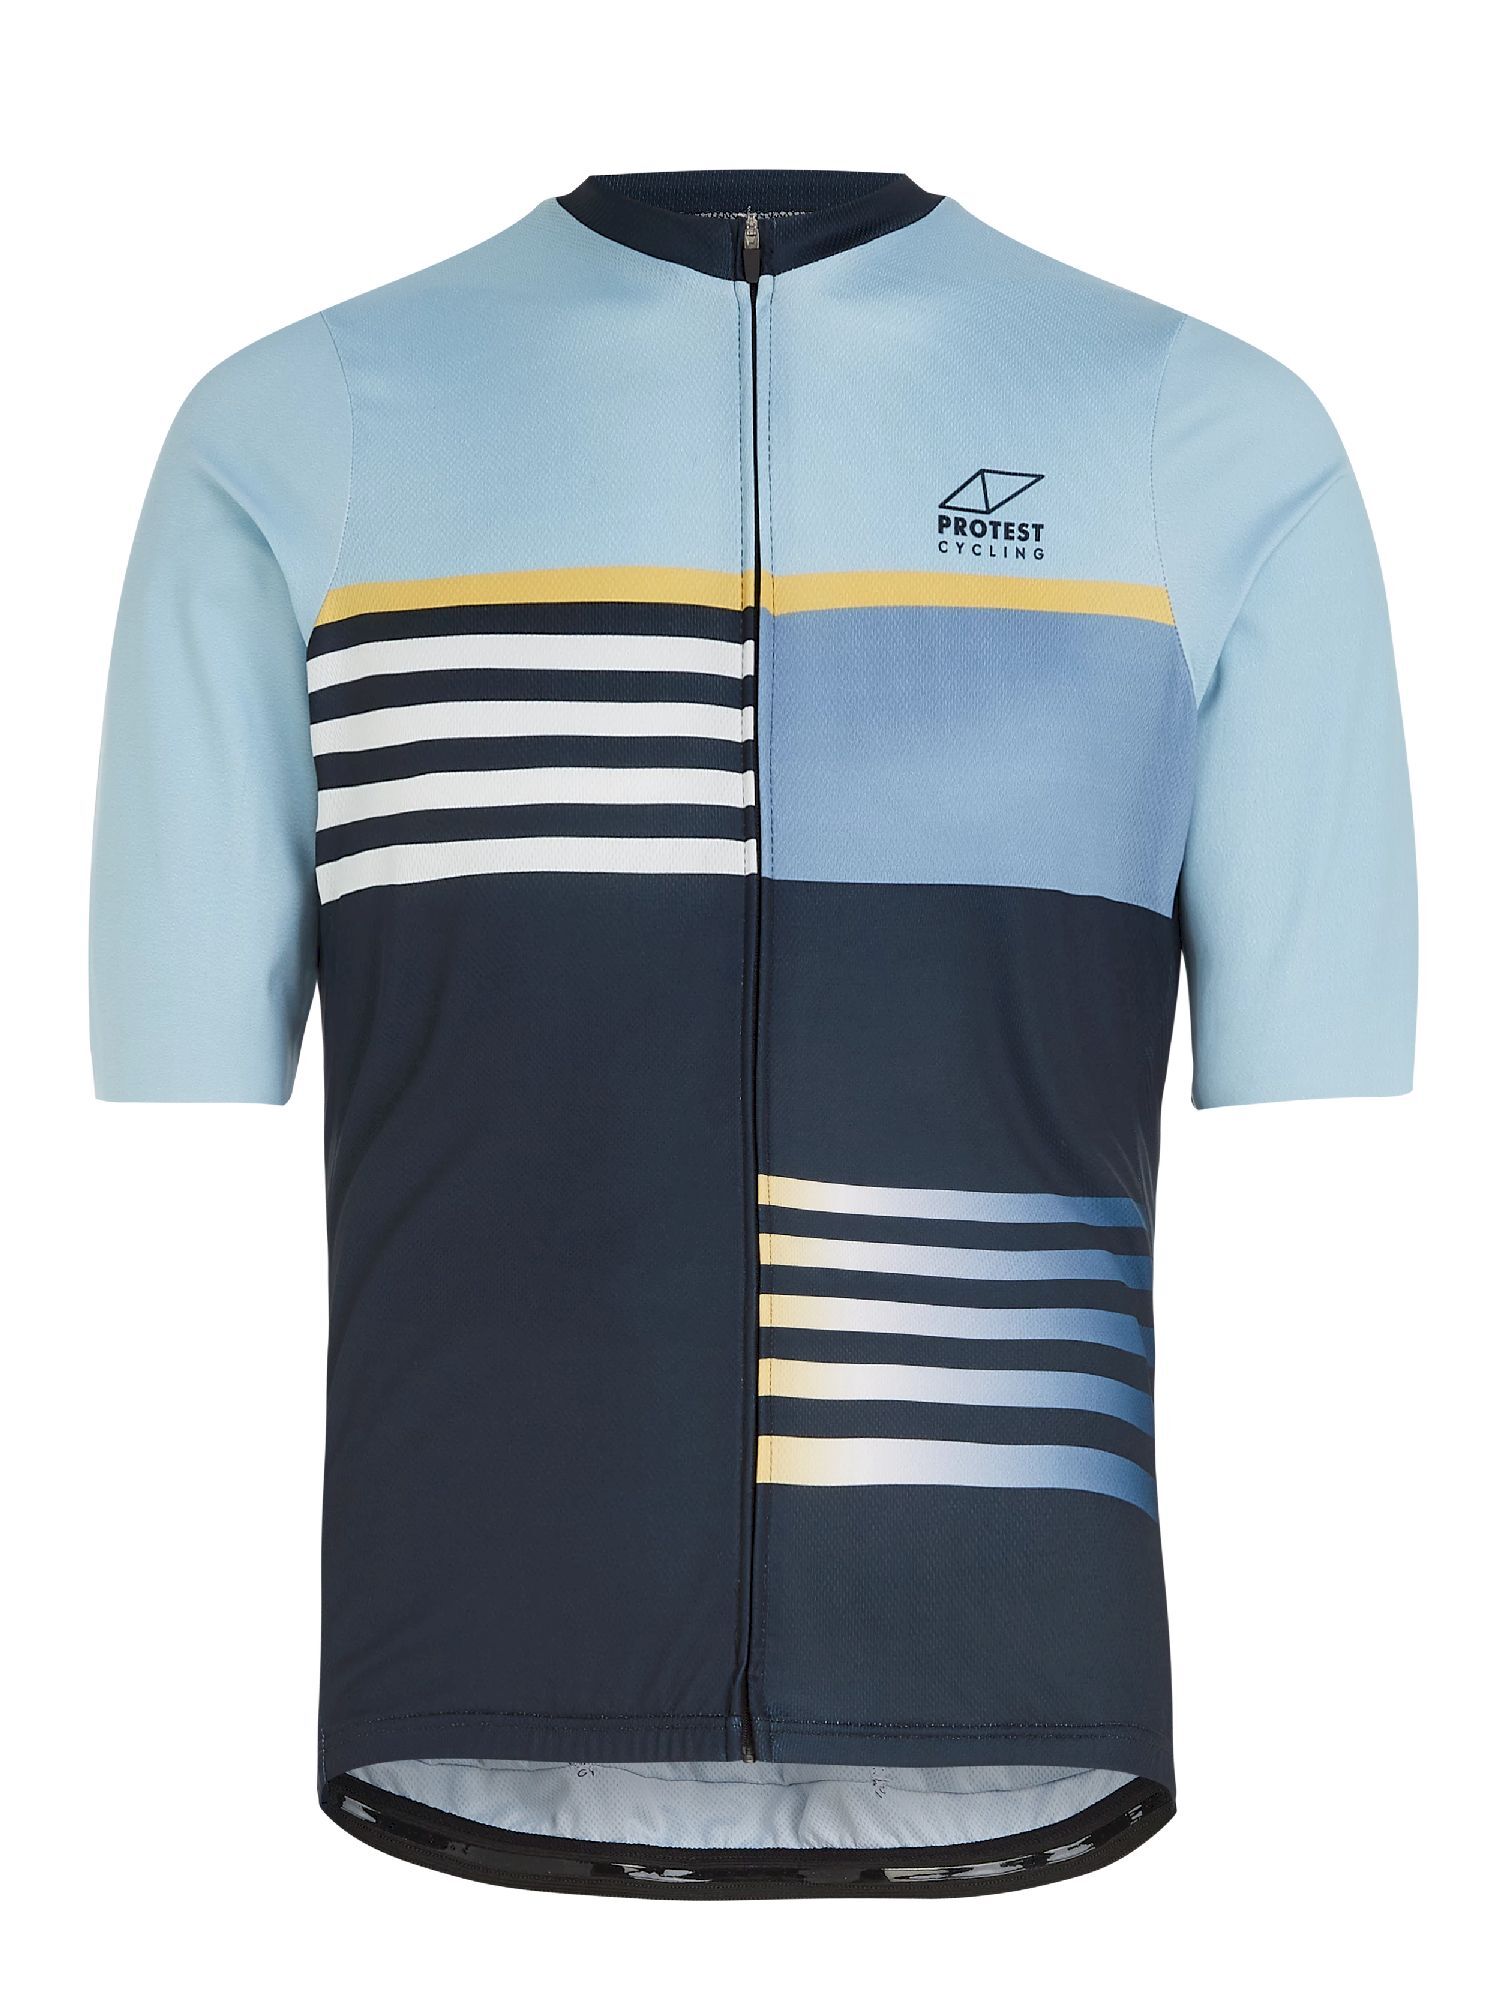 Protest Prthindes - Cycling jersey - Men's | Hardloop